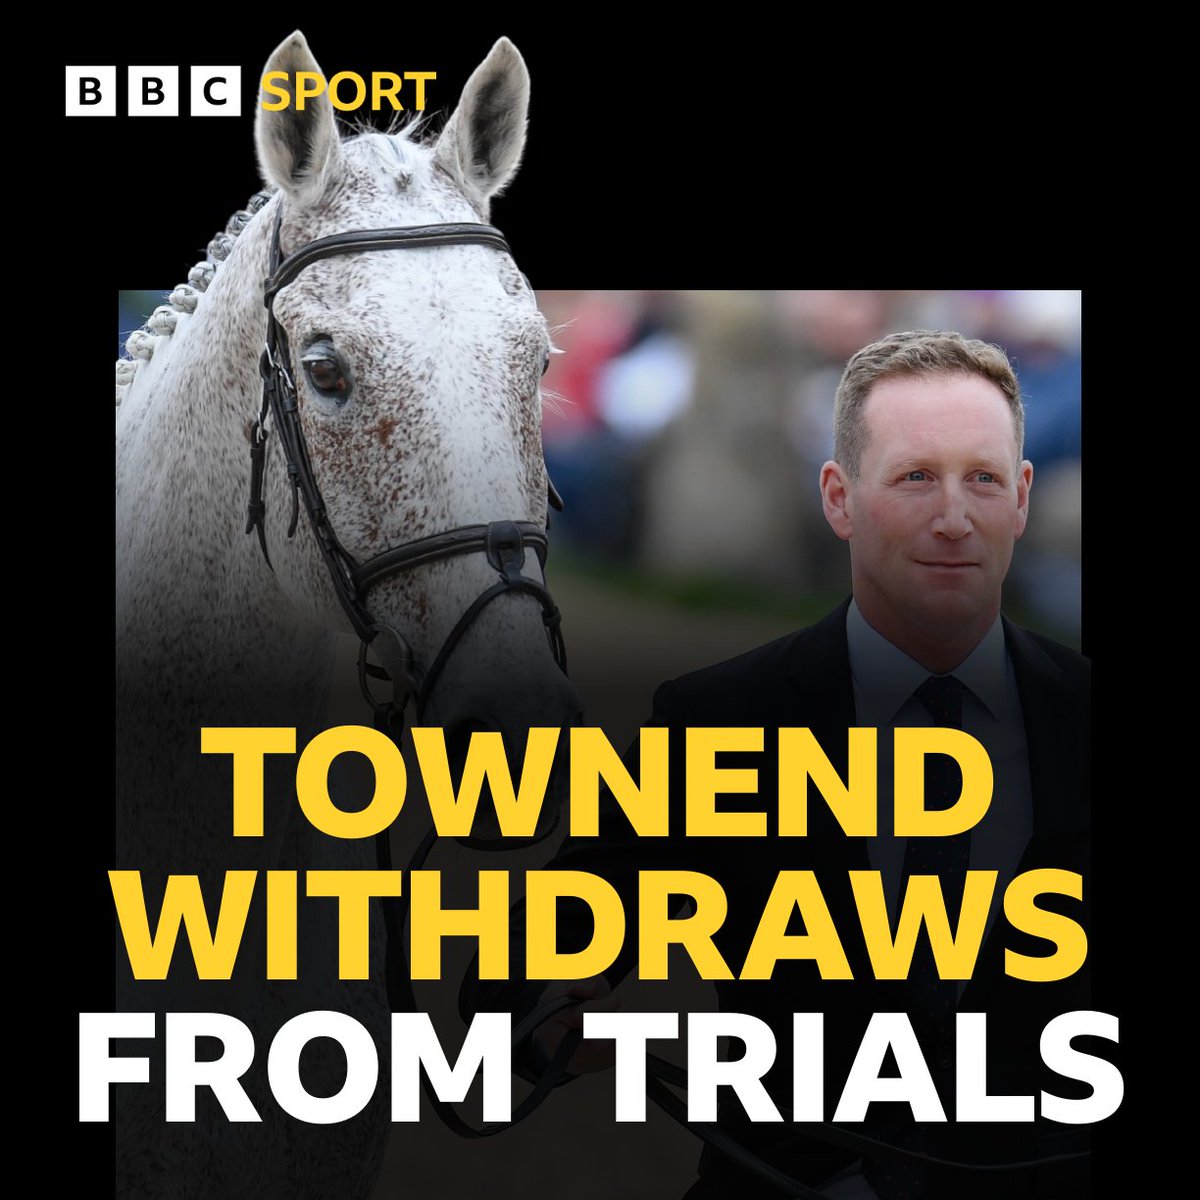 🐎 Oliver Townend has withdrawn from the Mars Badminton Horse Trials after his horse Ballaghmor Class recently recovered from an abscess. ⭐️ Townend says it's the first time the horse has missed a five star event and that he is 'absolutely gutted.' #BBCRacing